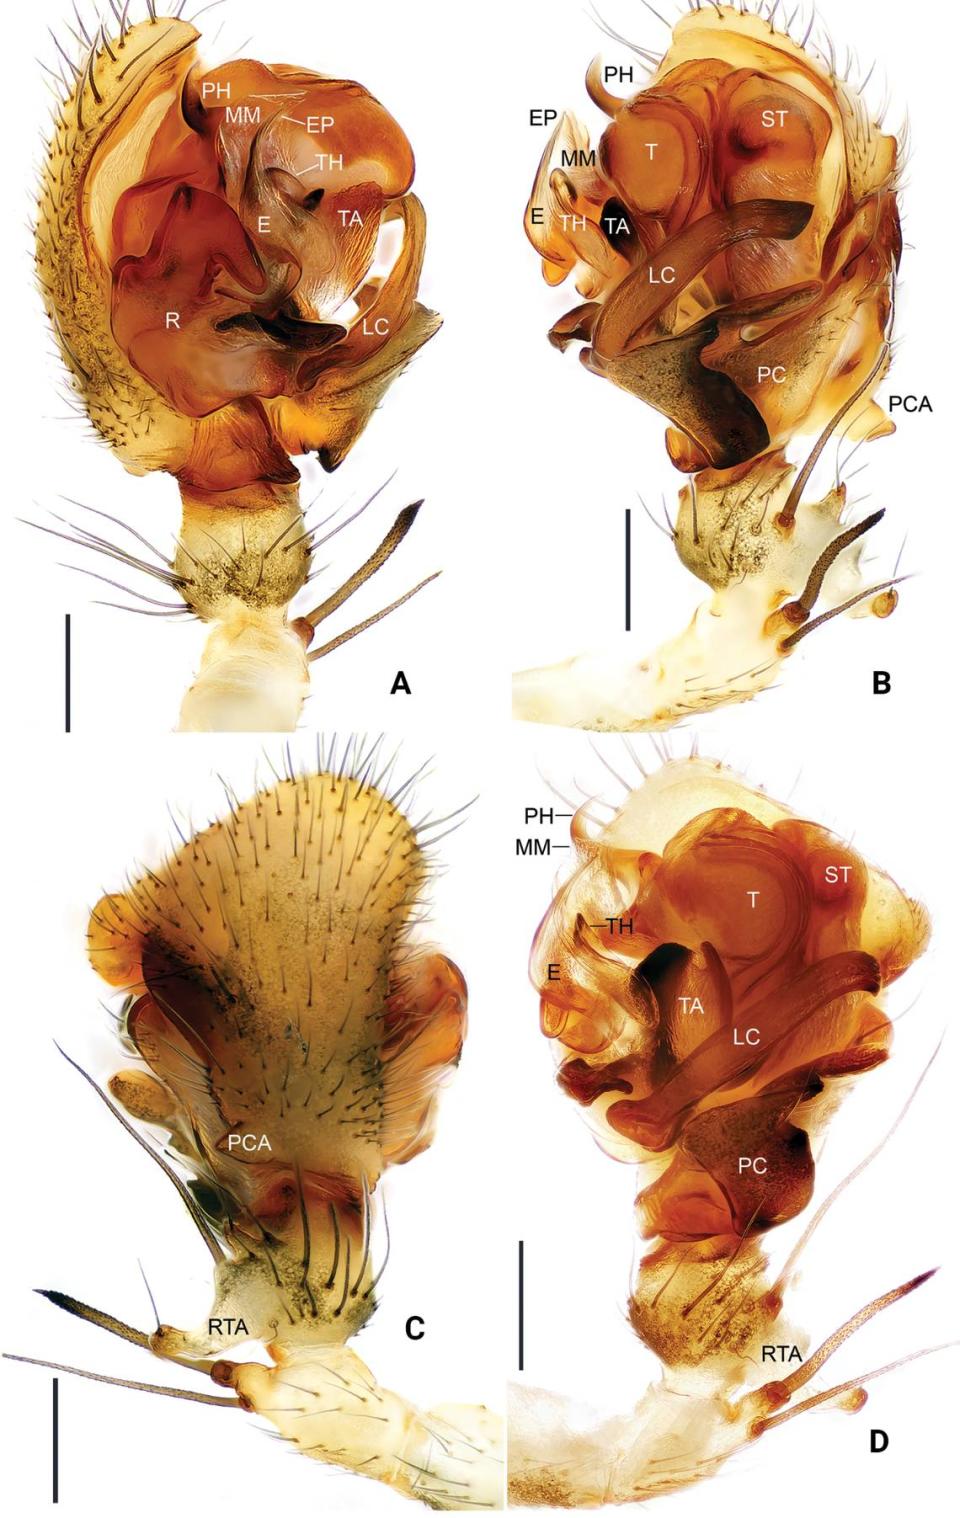 Close-up photos show the pedipalp of the male Floronia huishuiensis, or Huishui dwarf spider, and the part (R) that researchers described as “hook-shaped.”